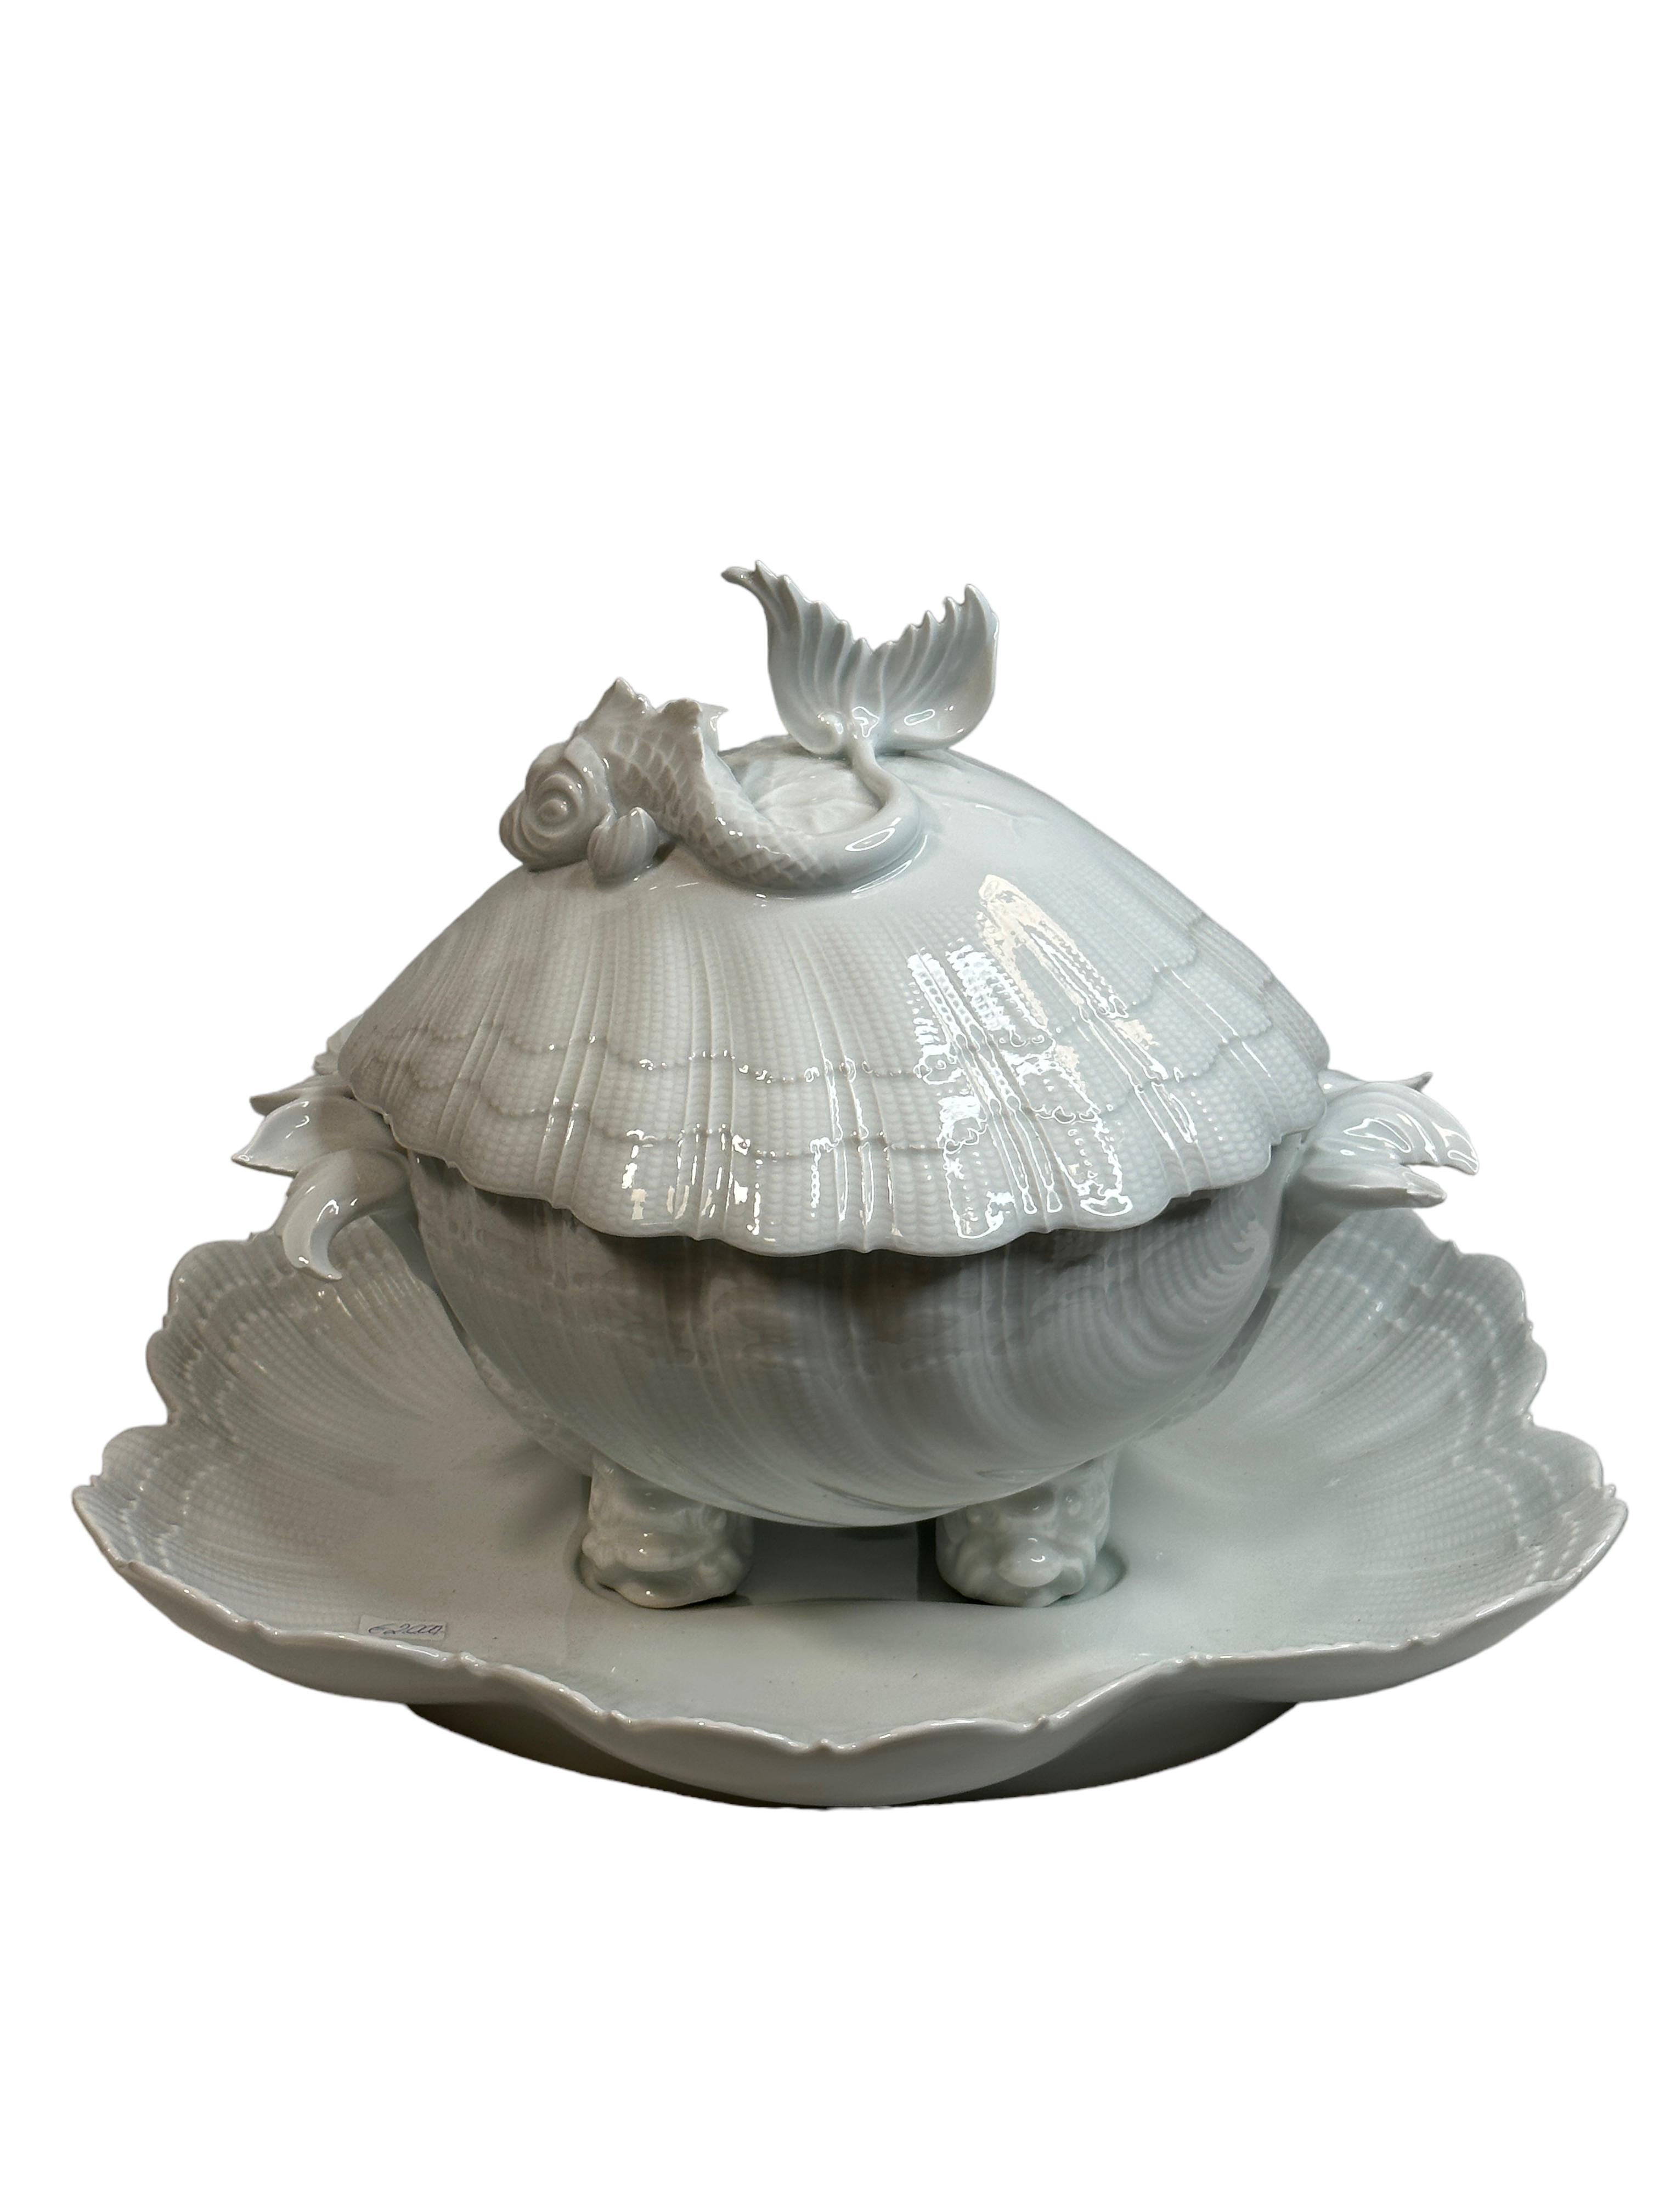 soup tureen with lid